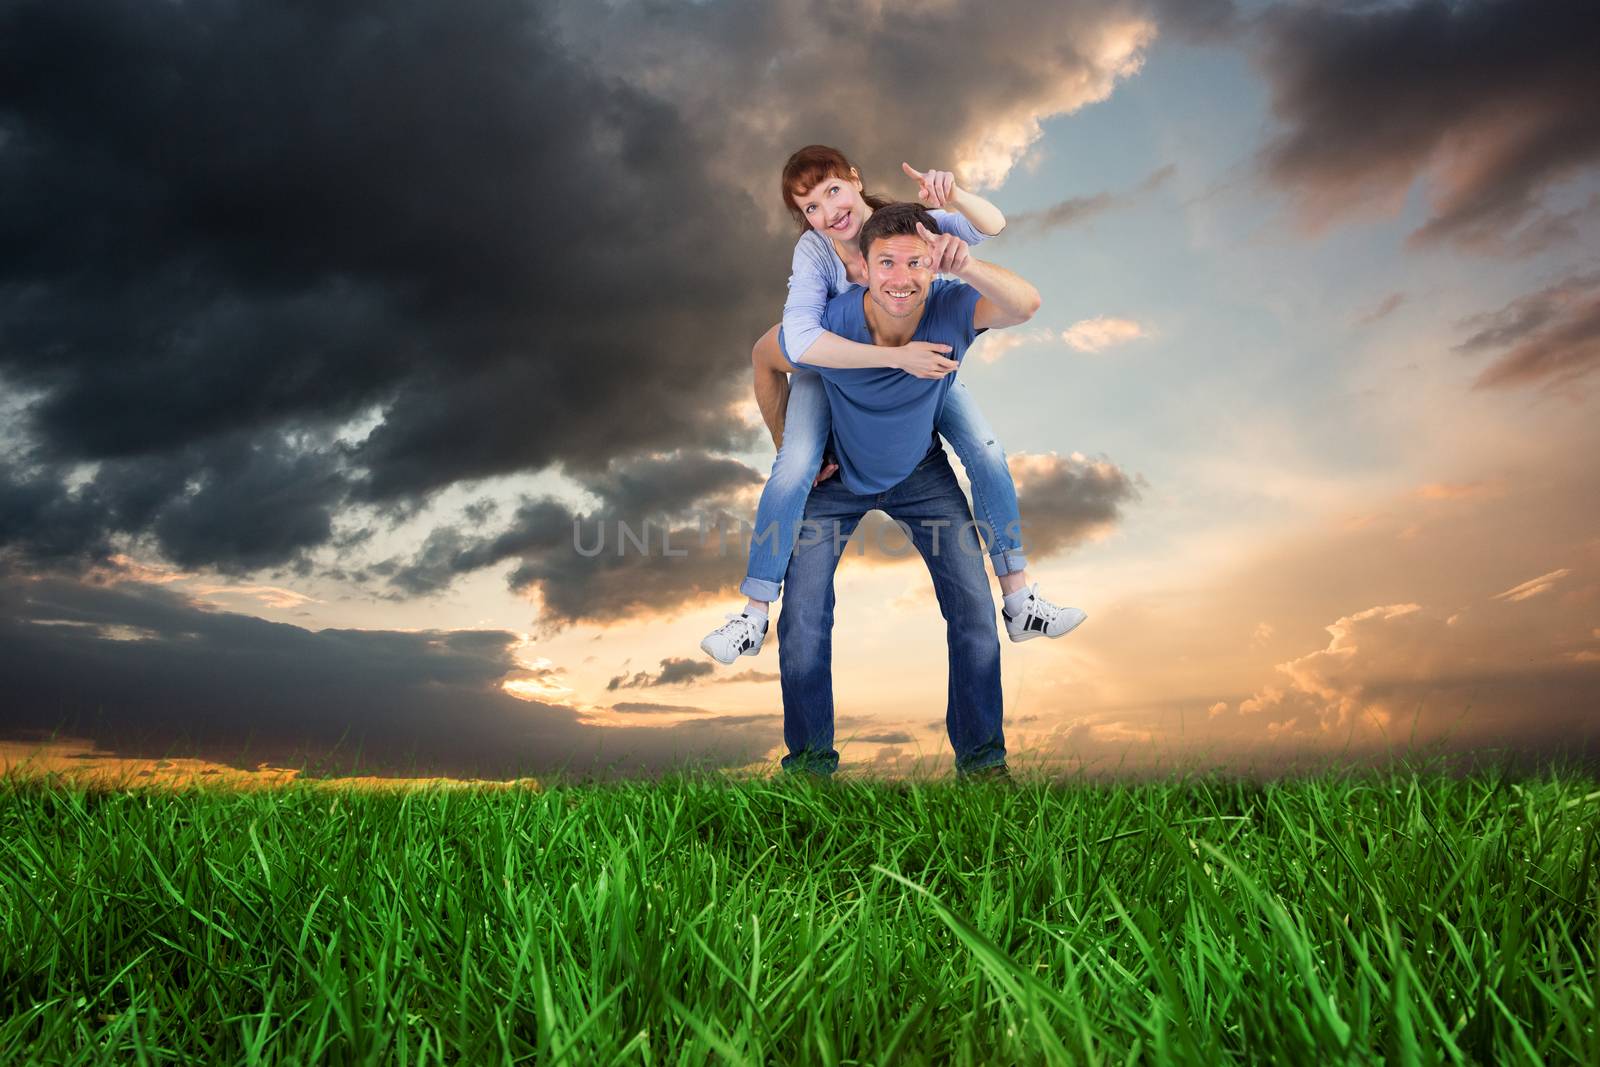 Man giving girl a piggy back against blue and orange sky with clouds